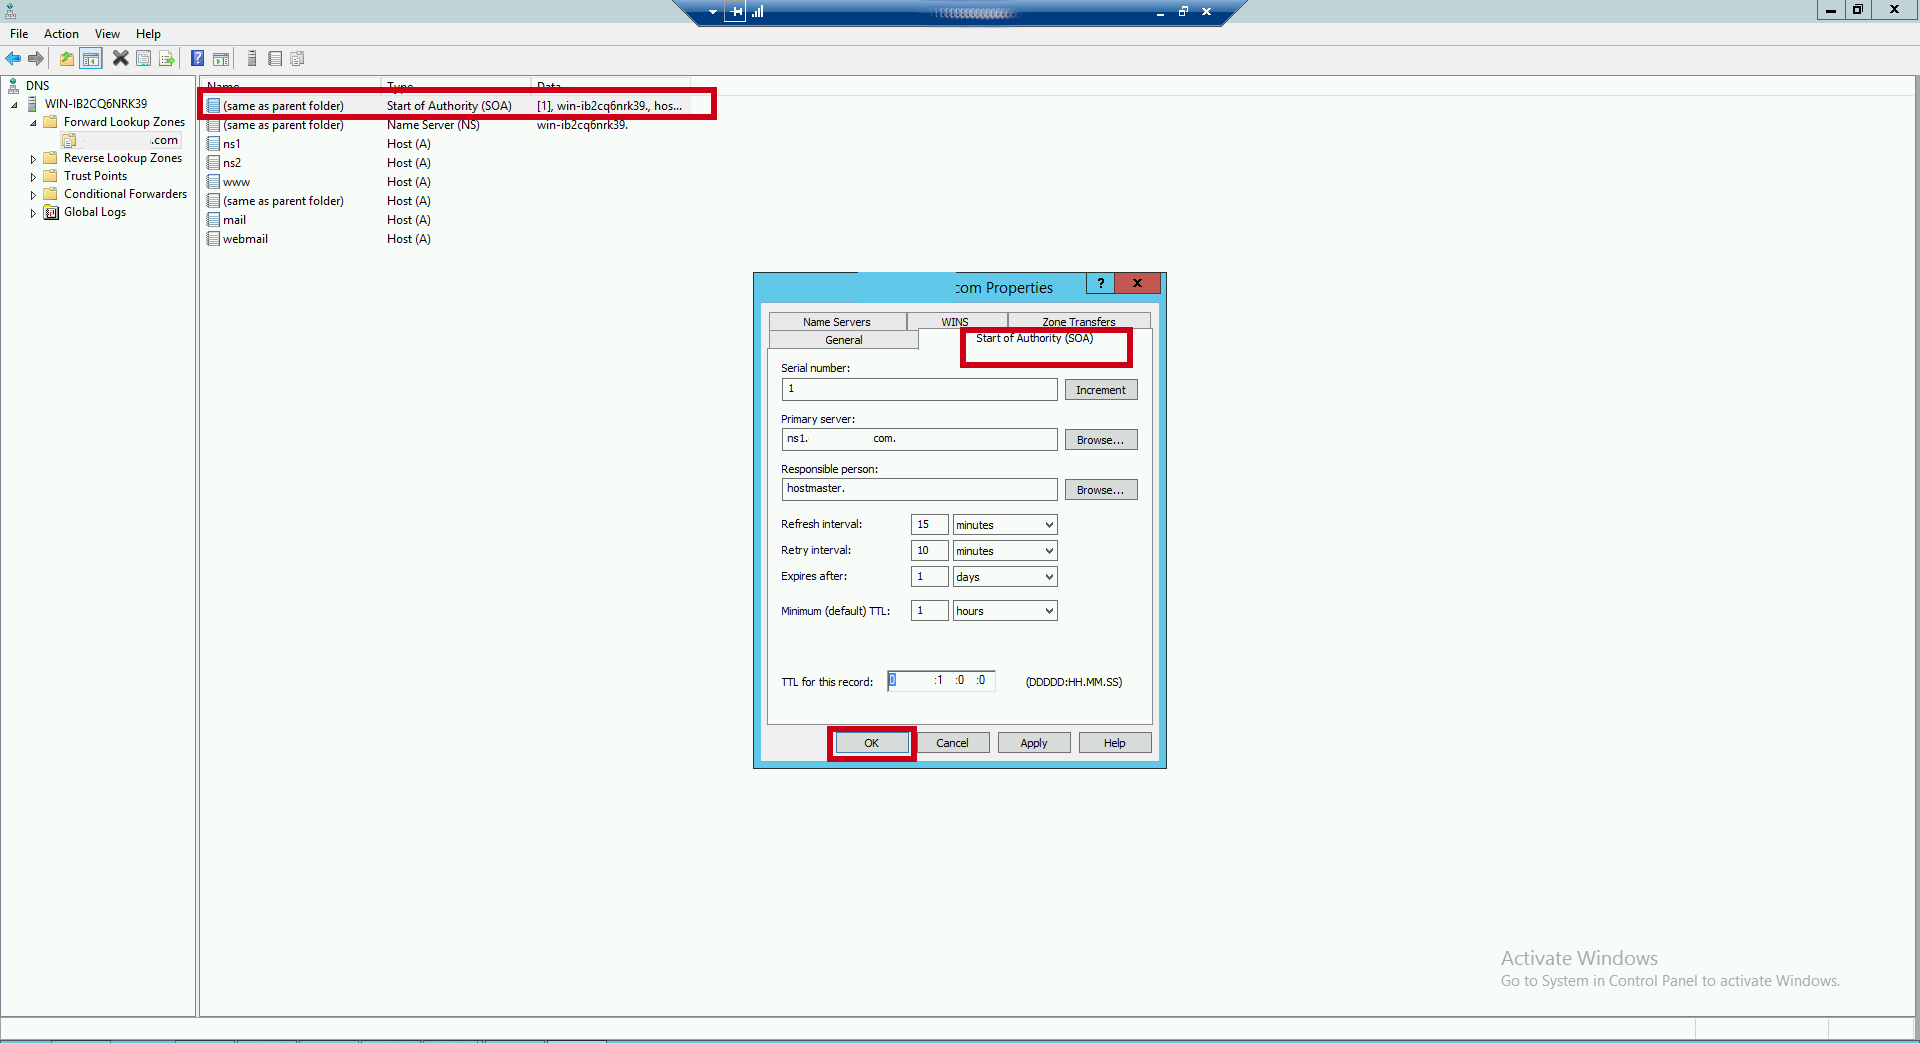 create-soa-1-record-dns-manager-windows-server-2012.png